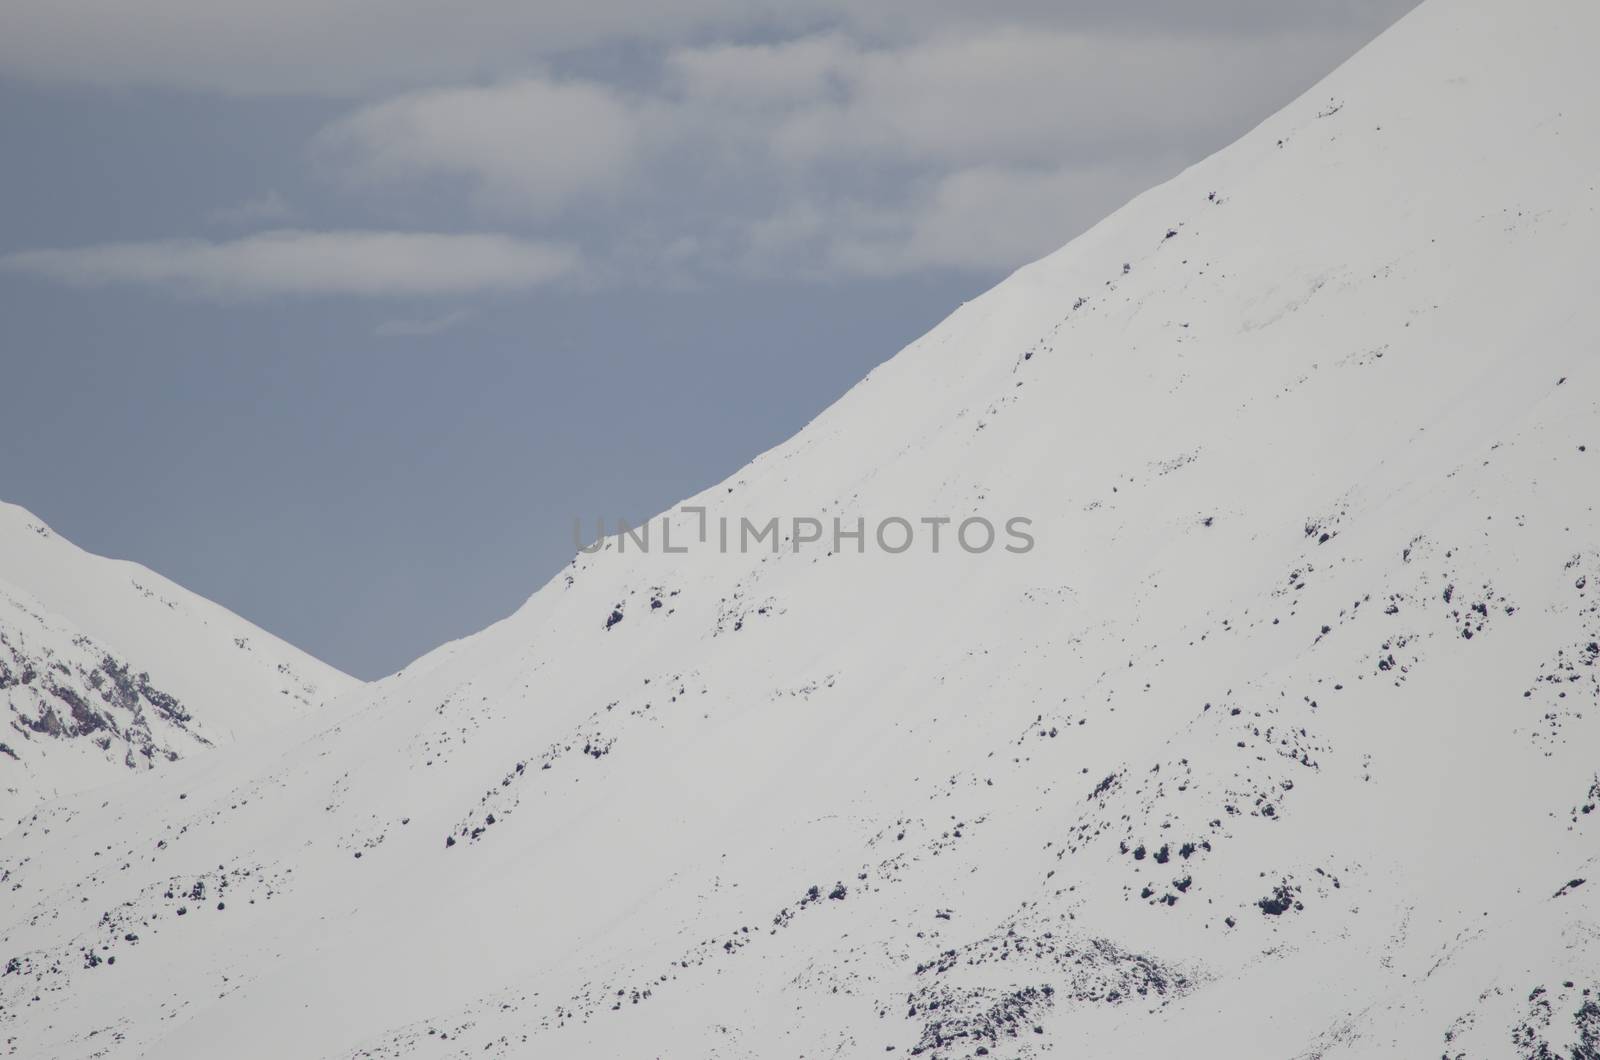 Snowy slopes of the Payachatas volcanic chain. by VictorSuarez